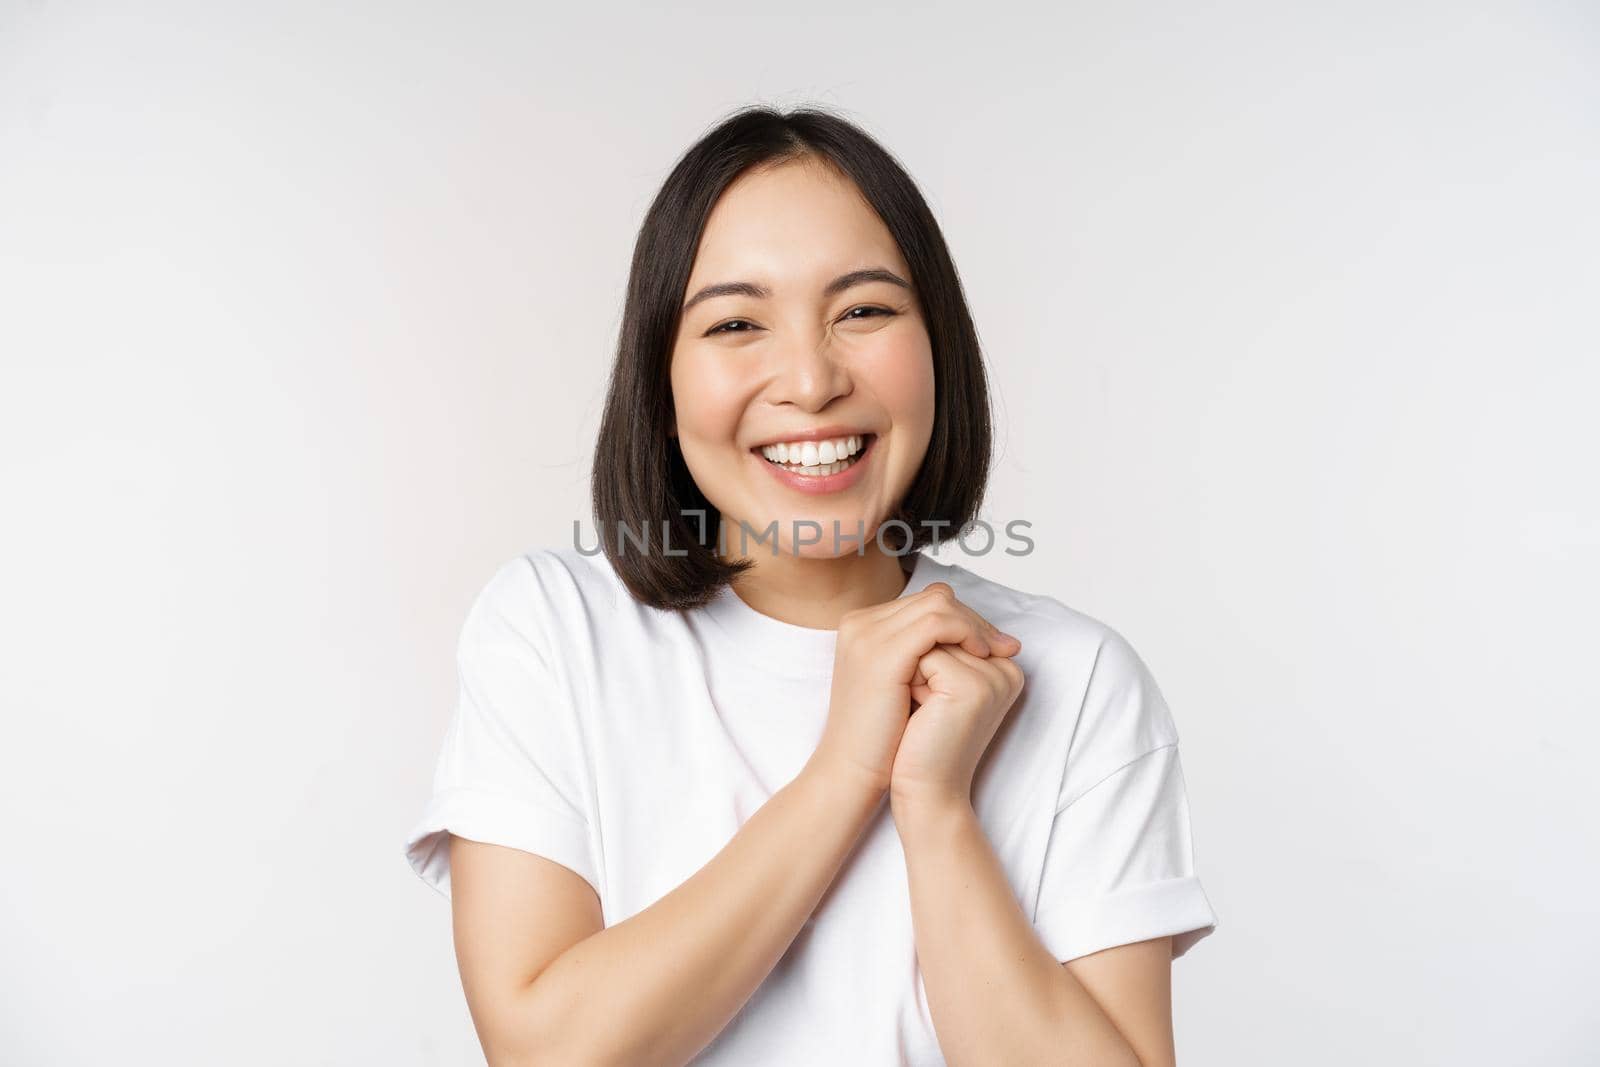 Portrait of beautiful korean woman with healthy white smile, laughing and looking happy at camera, standing in tshirt over white studio background.